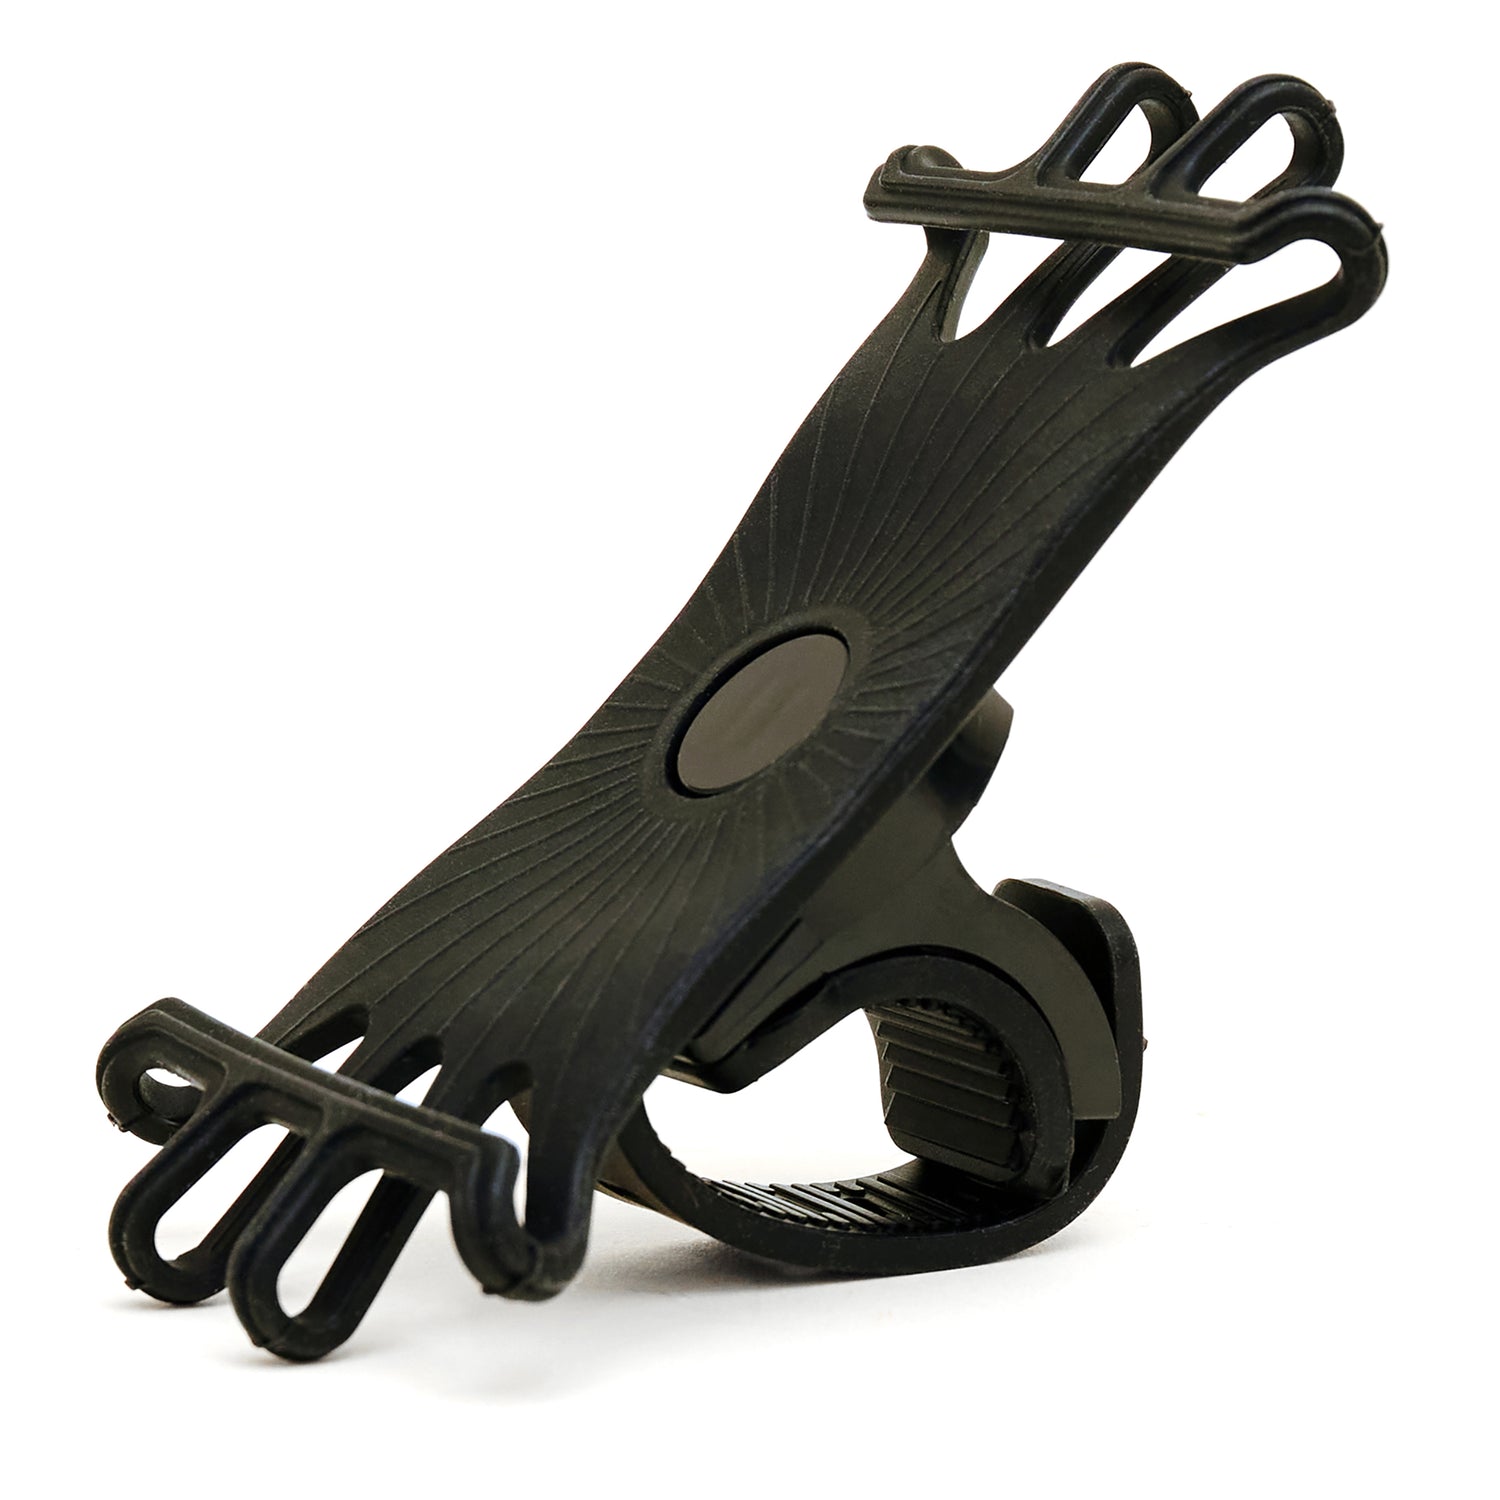 The Perfect Phone Stand in Black – Kikkerland Design Inc